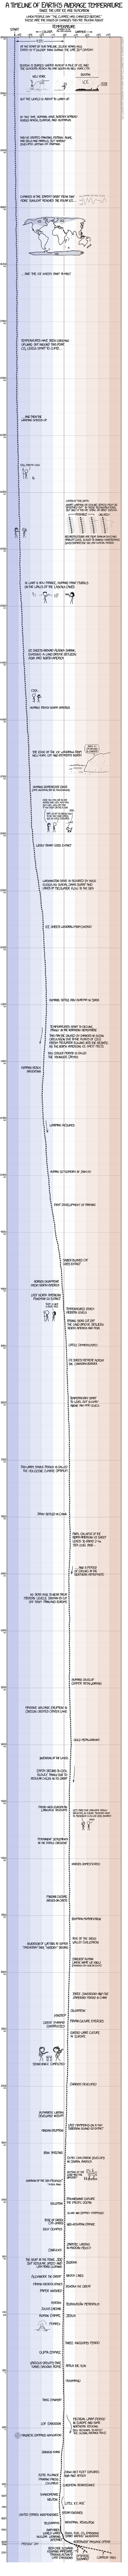 A Timeline of Earth's Average Temperature infographic